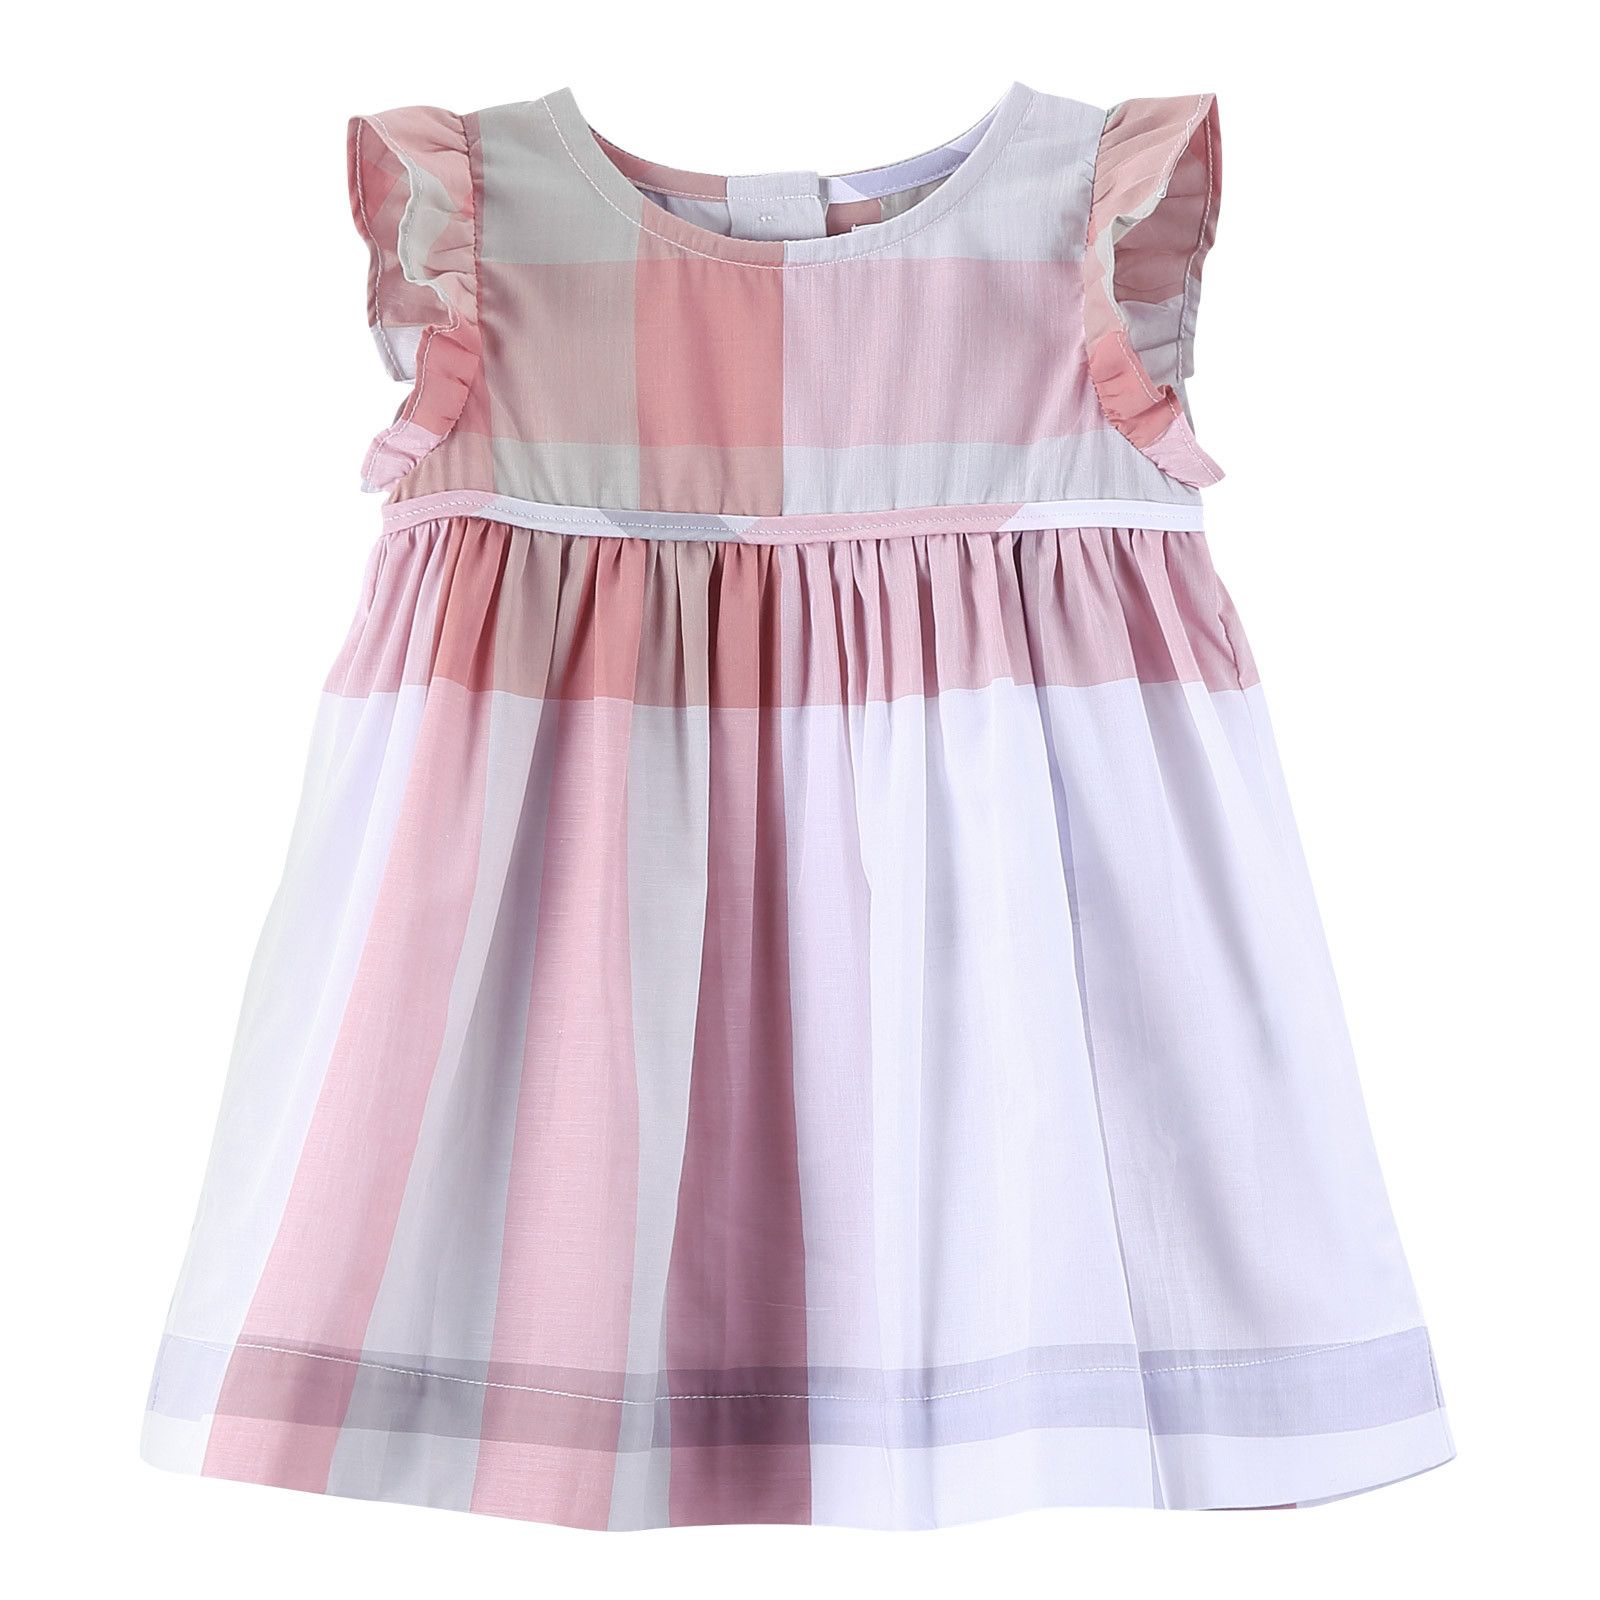 Baby Girls Pink Check Dress With Frill Sleeve - CÉMAROSE | Children's Fashion Store - 1